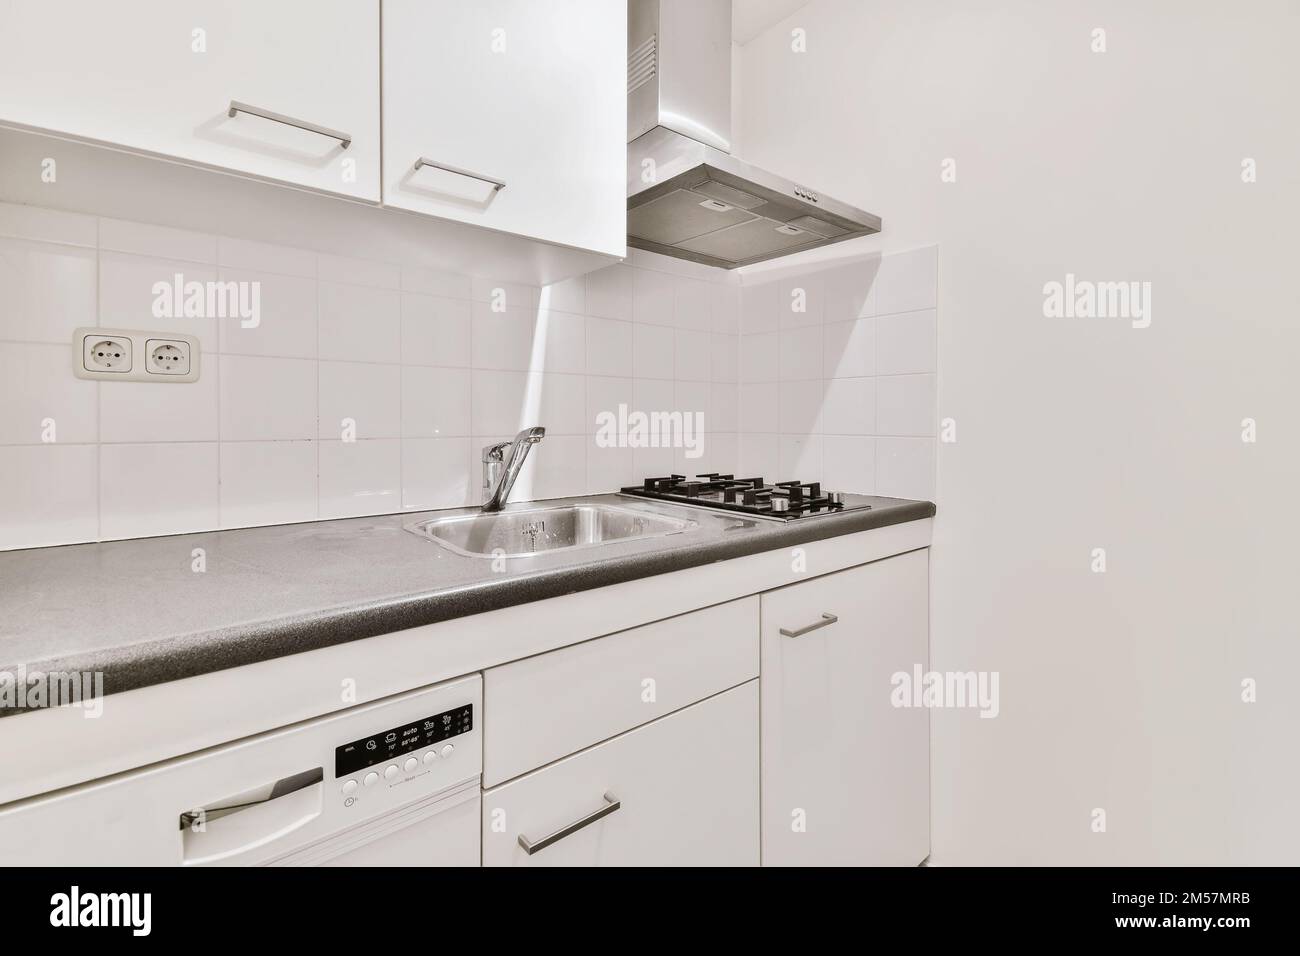 a kitchen with white cabinets and black counter tops on the counters in front of the dishwasher there is an appliance Stock Photo